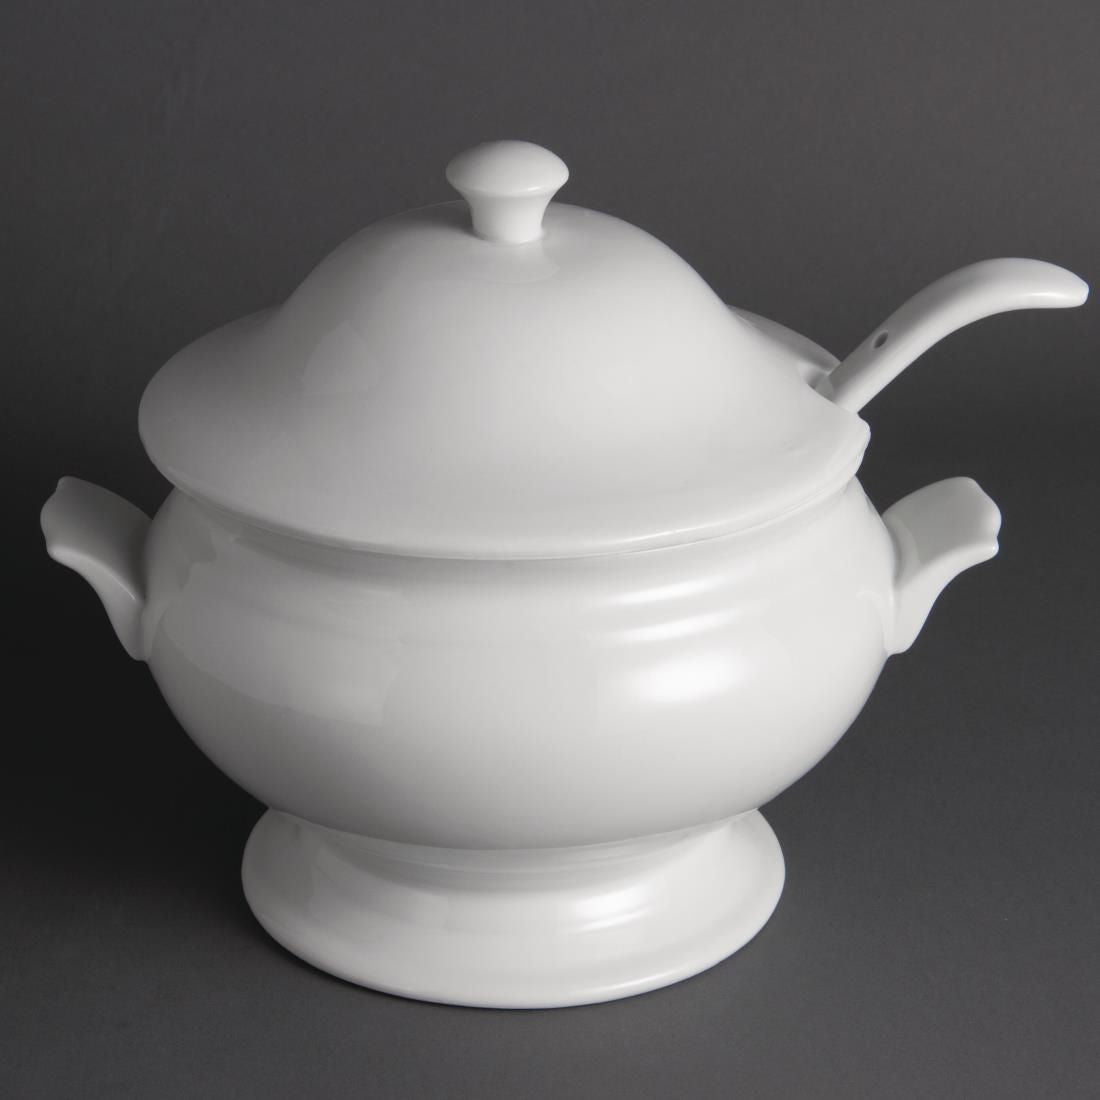 Y094 Olympia Soup Tureen and Ladle 2.5Ltr 88oz